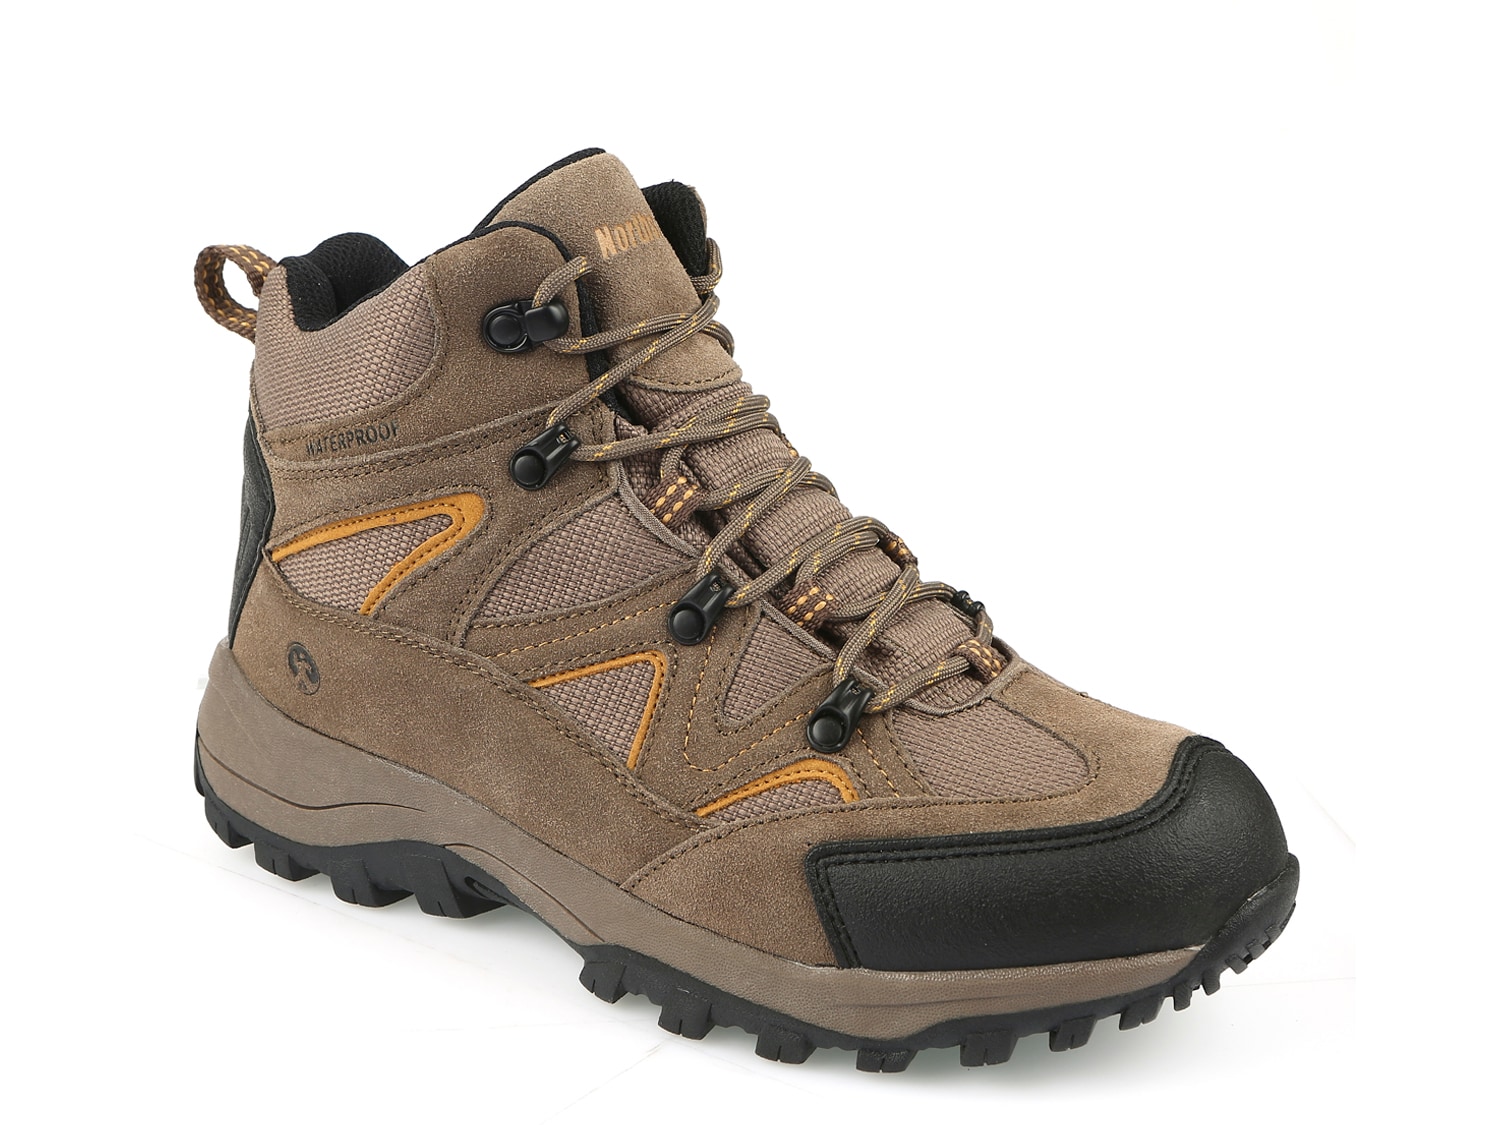 Northside Snohomish Hiking Boot - Men's - Free Shipping | DSW